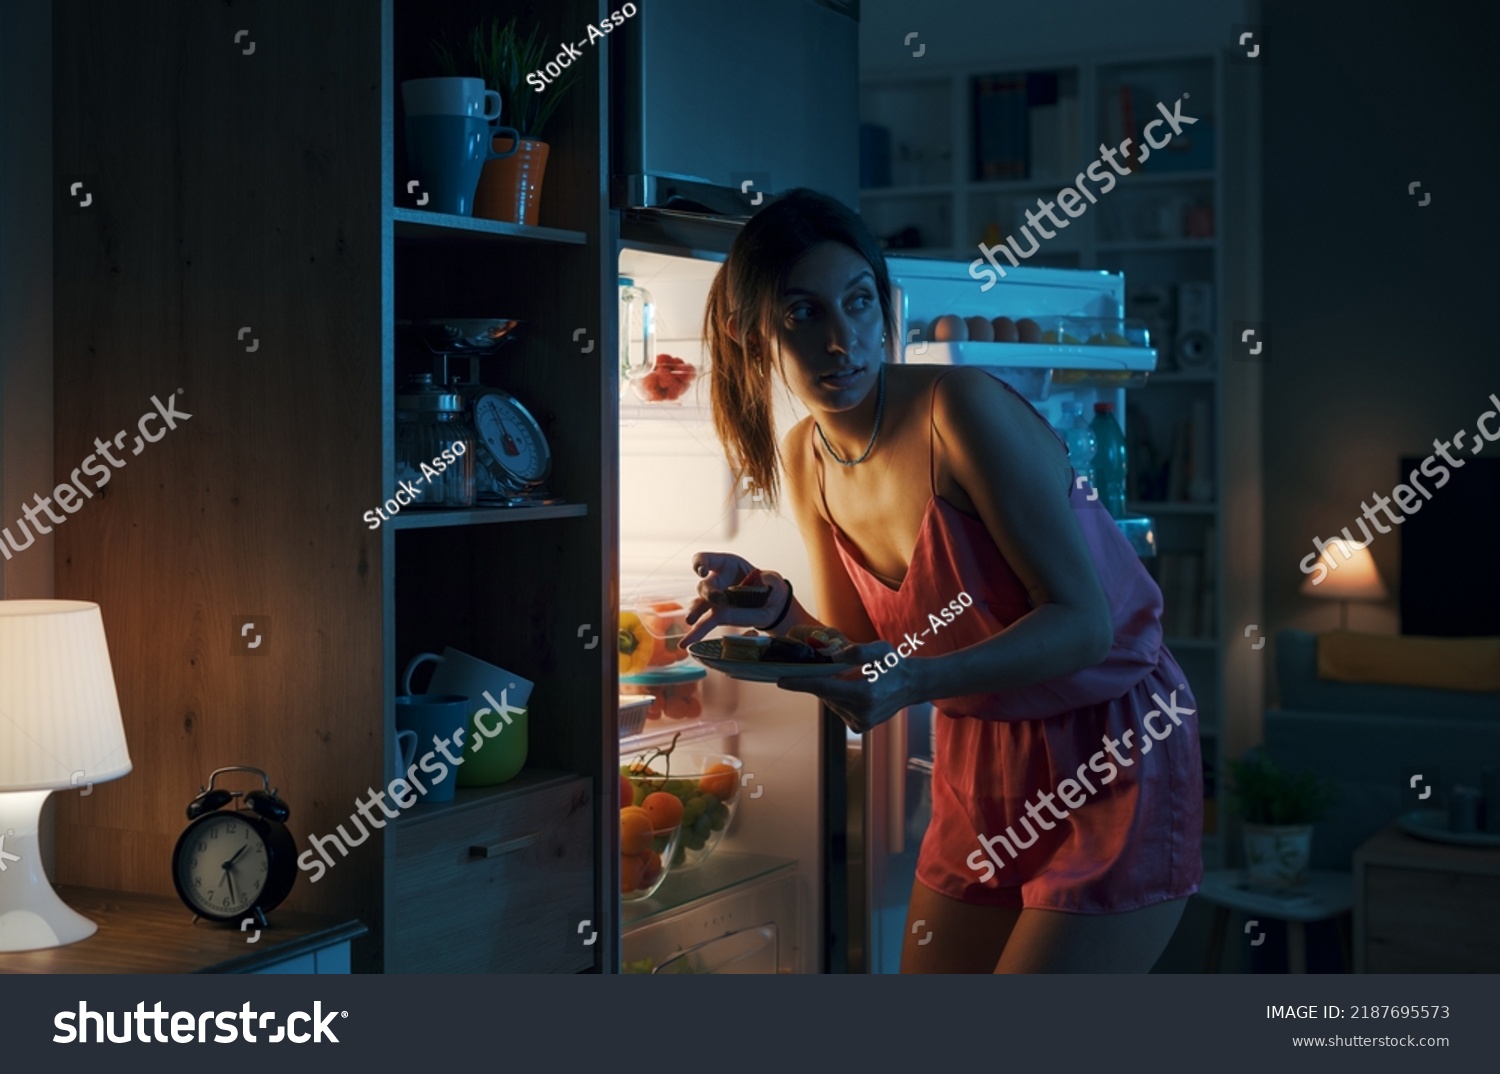 Hungry woman looking in the fridge and eating delicious pastries at night, she is breaking her diet #2187695573